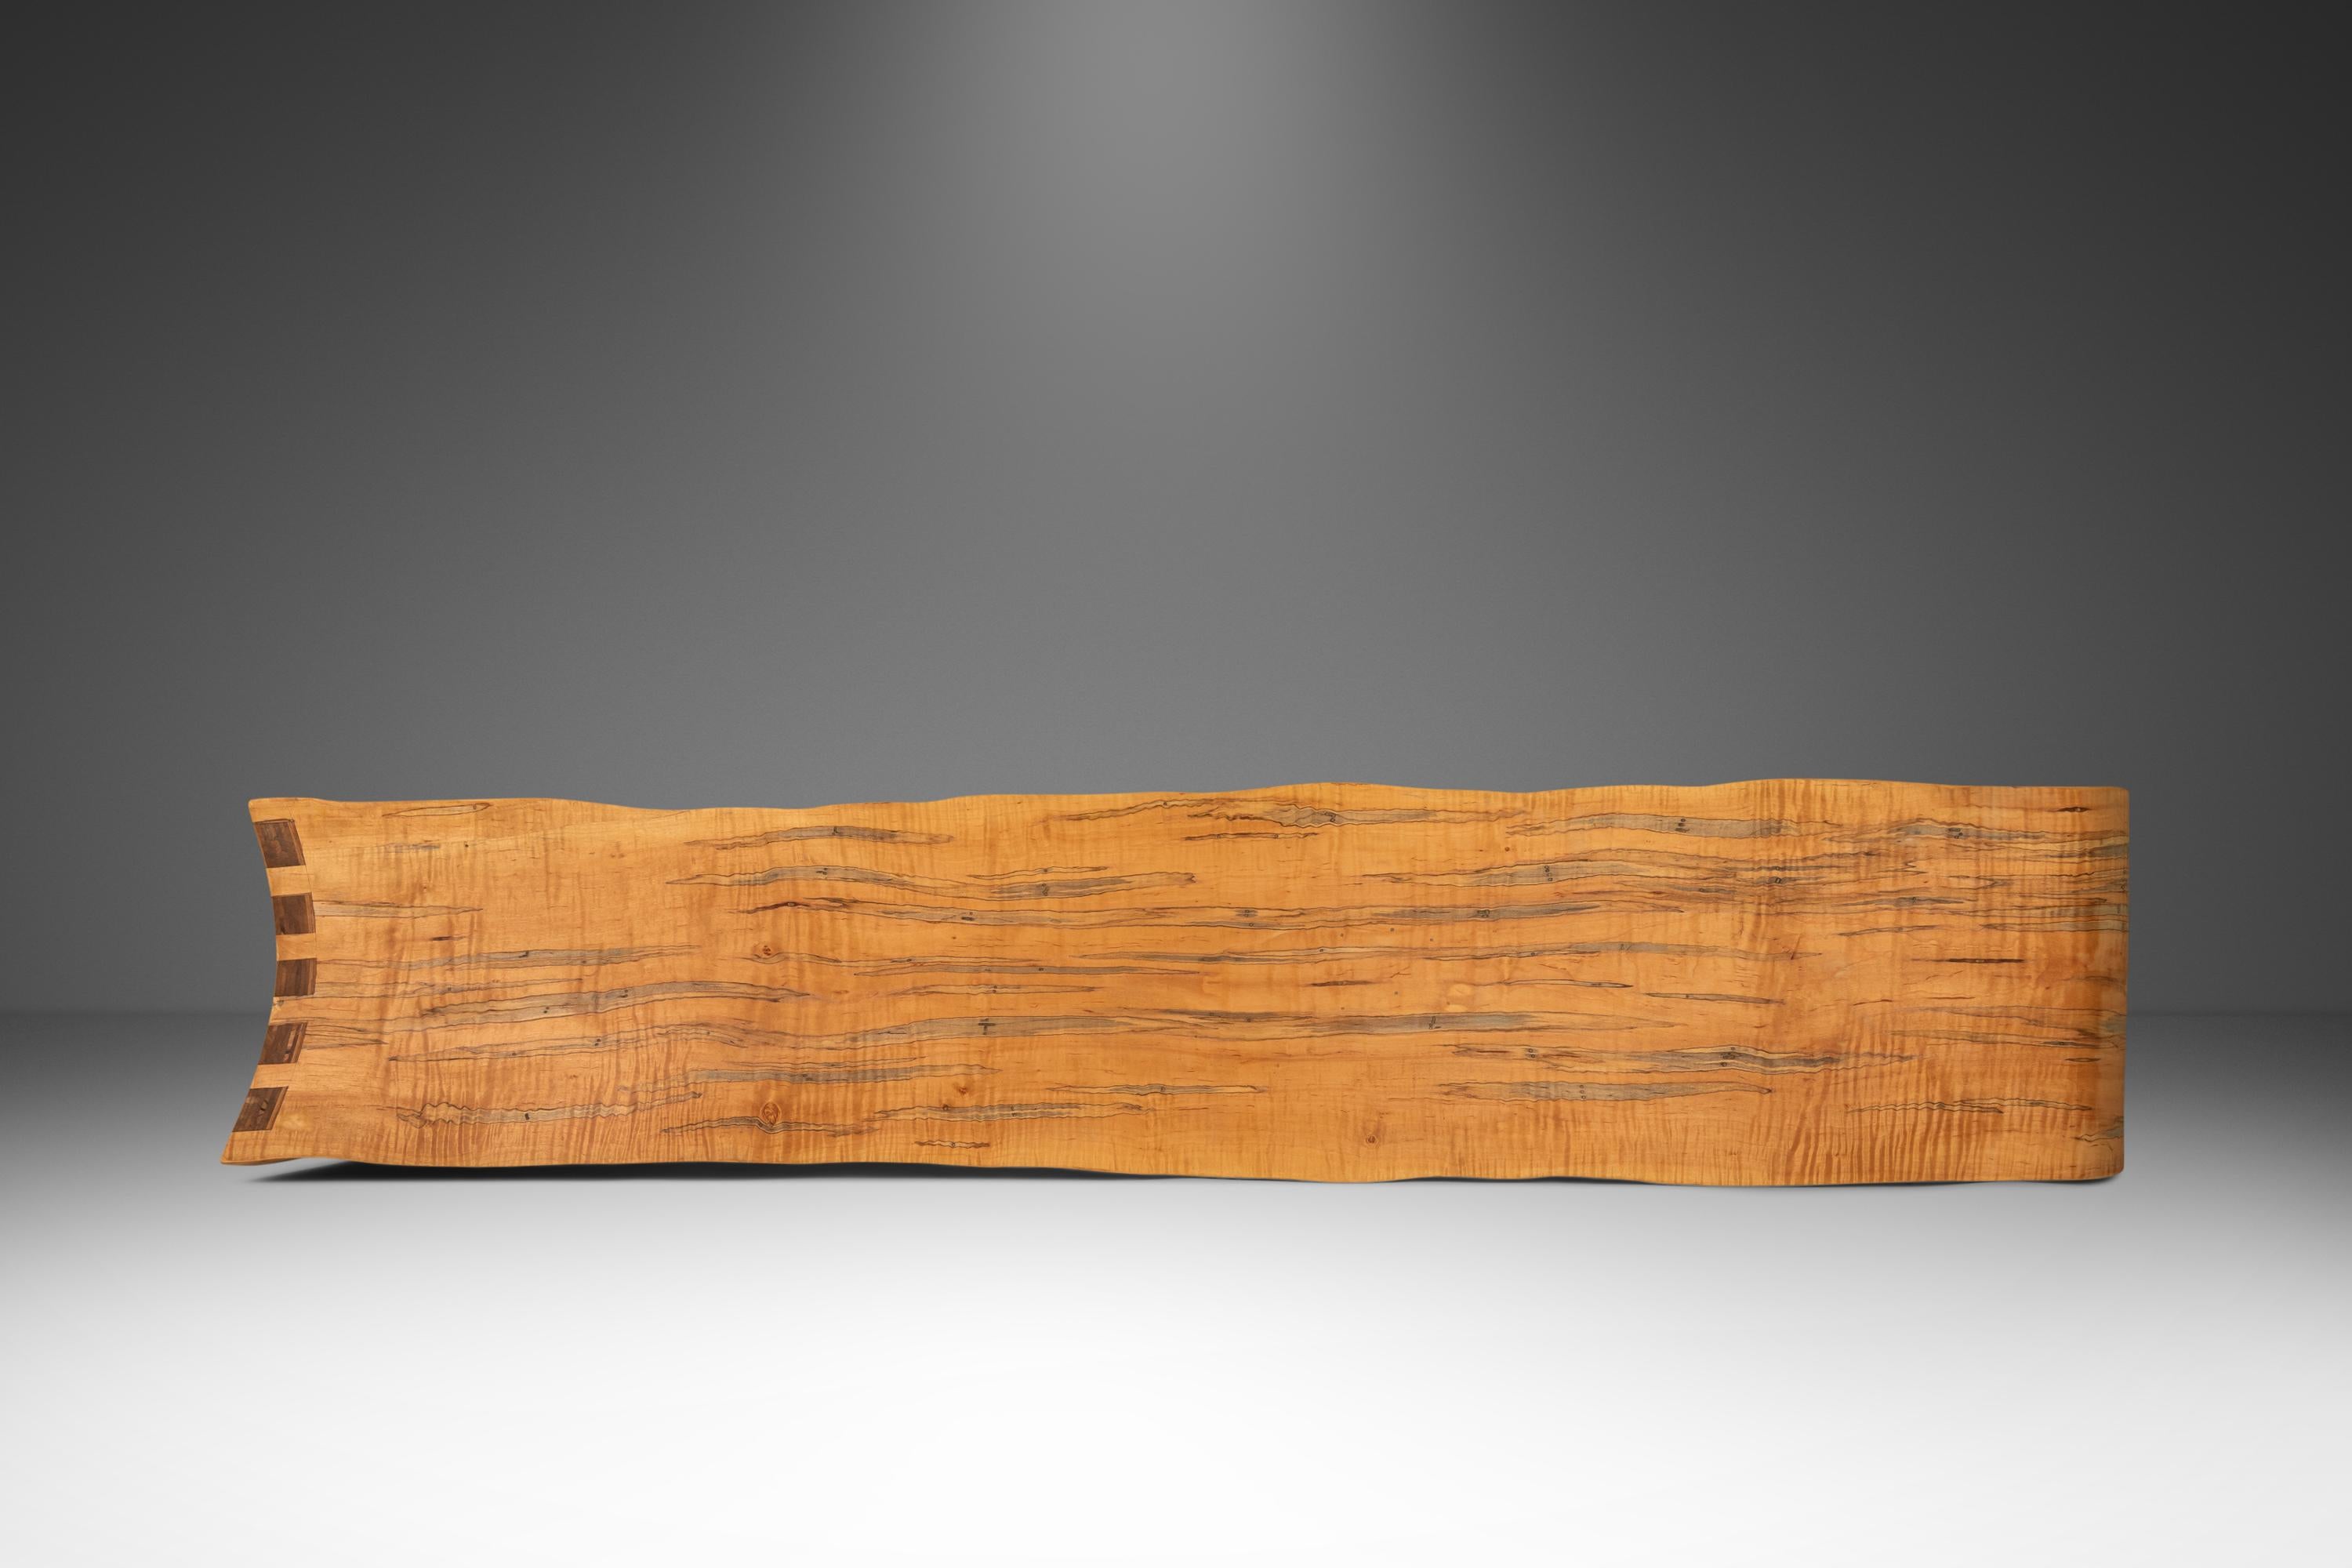 Bentwood Asymmetrical Abstract Three Seater Bench in Ambrosia Maple, Usa, 1980s For Sale 1